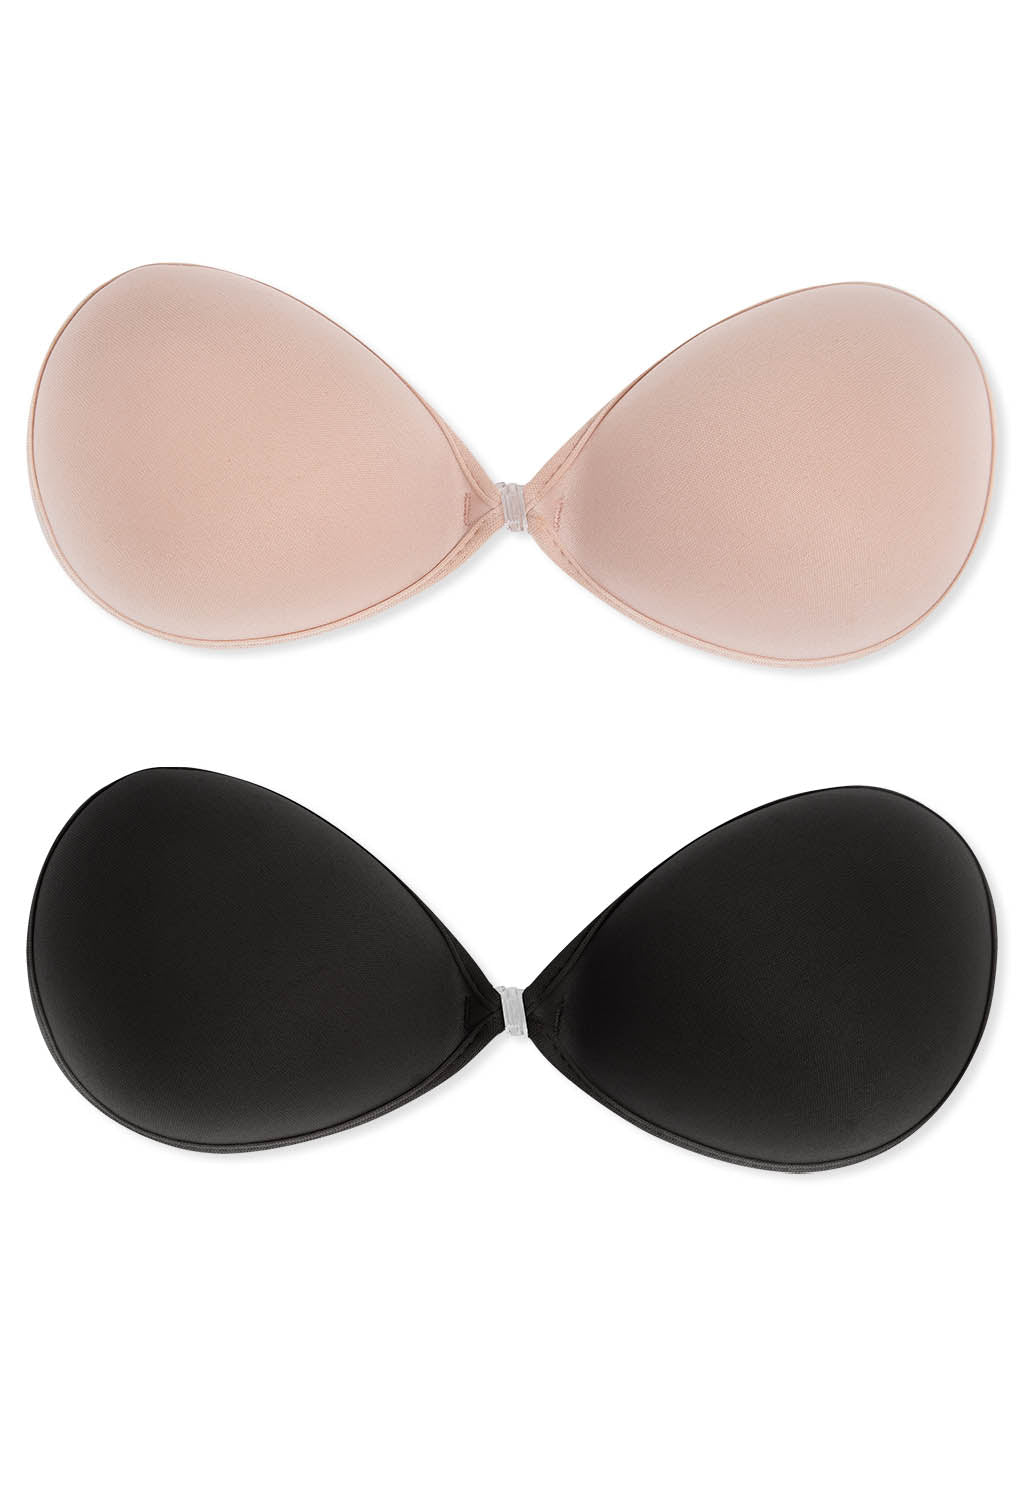 Wholesale push up silicon bra For All Your Intimate Needs